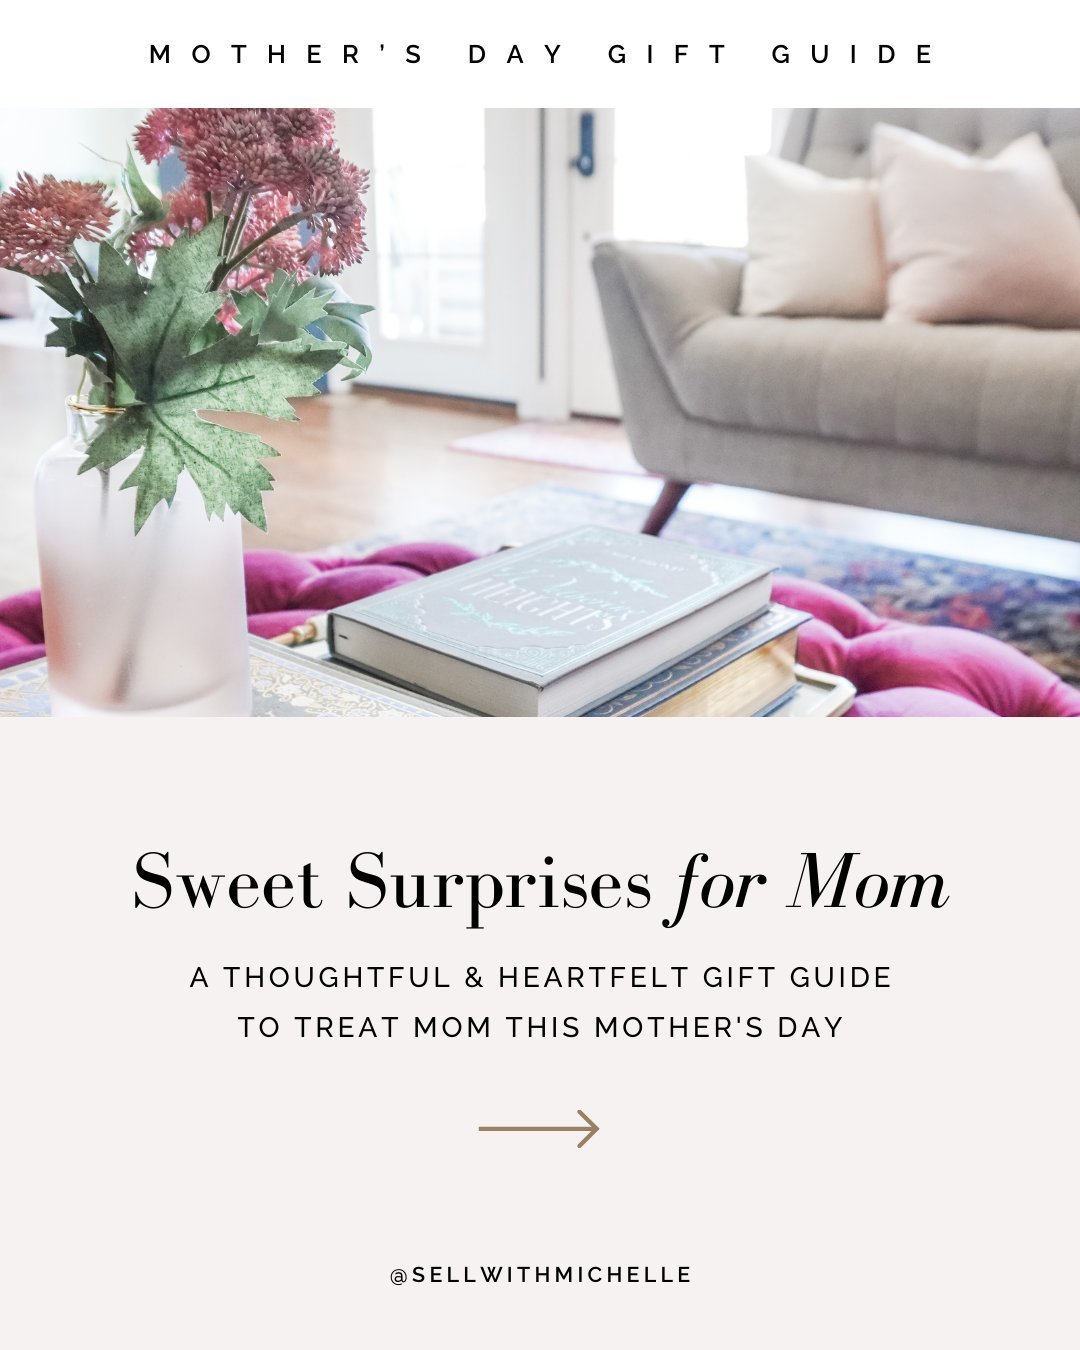 🌷💕 Mother's Day is almost here!

So if you're looking for ways to make the day extra special for mom 👉 swipe through the post for some thoughtful and heartfelt treats that are sure to make her smile!

Be sure to save for later or send to someone w